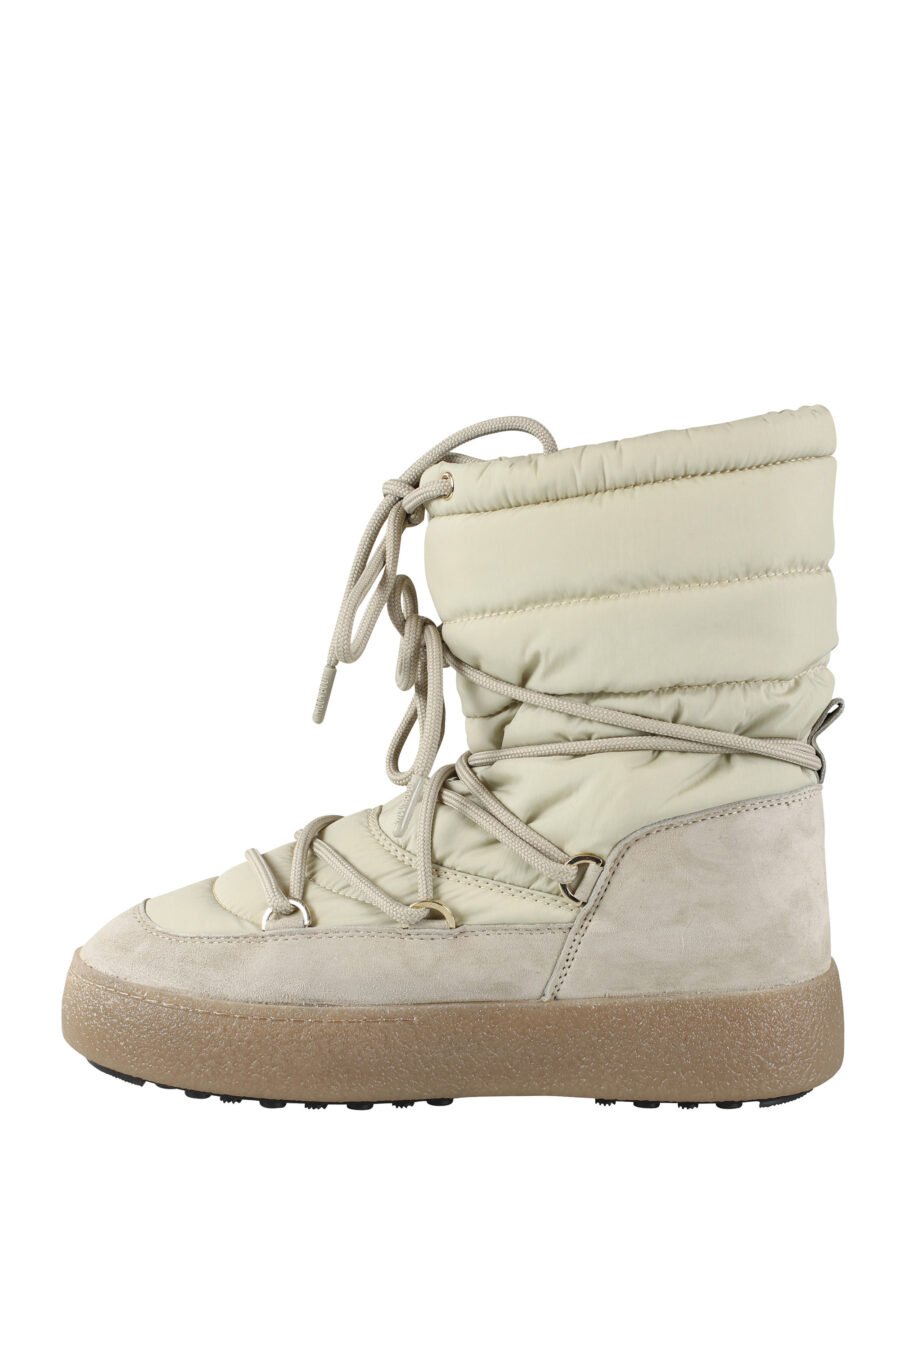 Sand coloured short snow boots with logo - IMG 9627